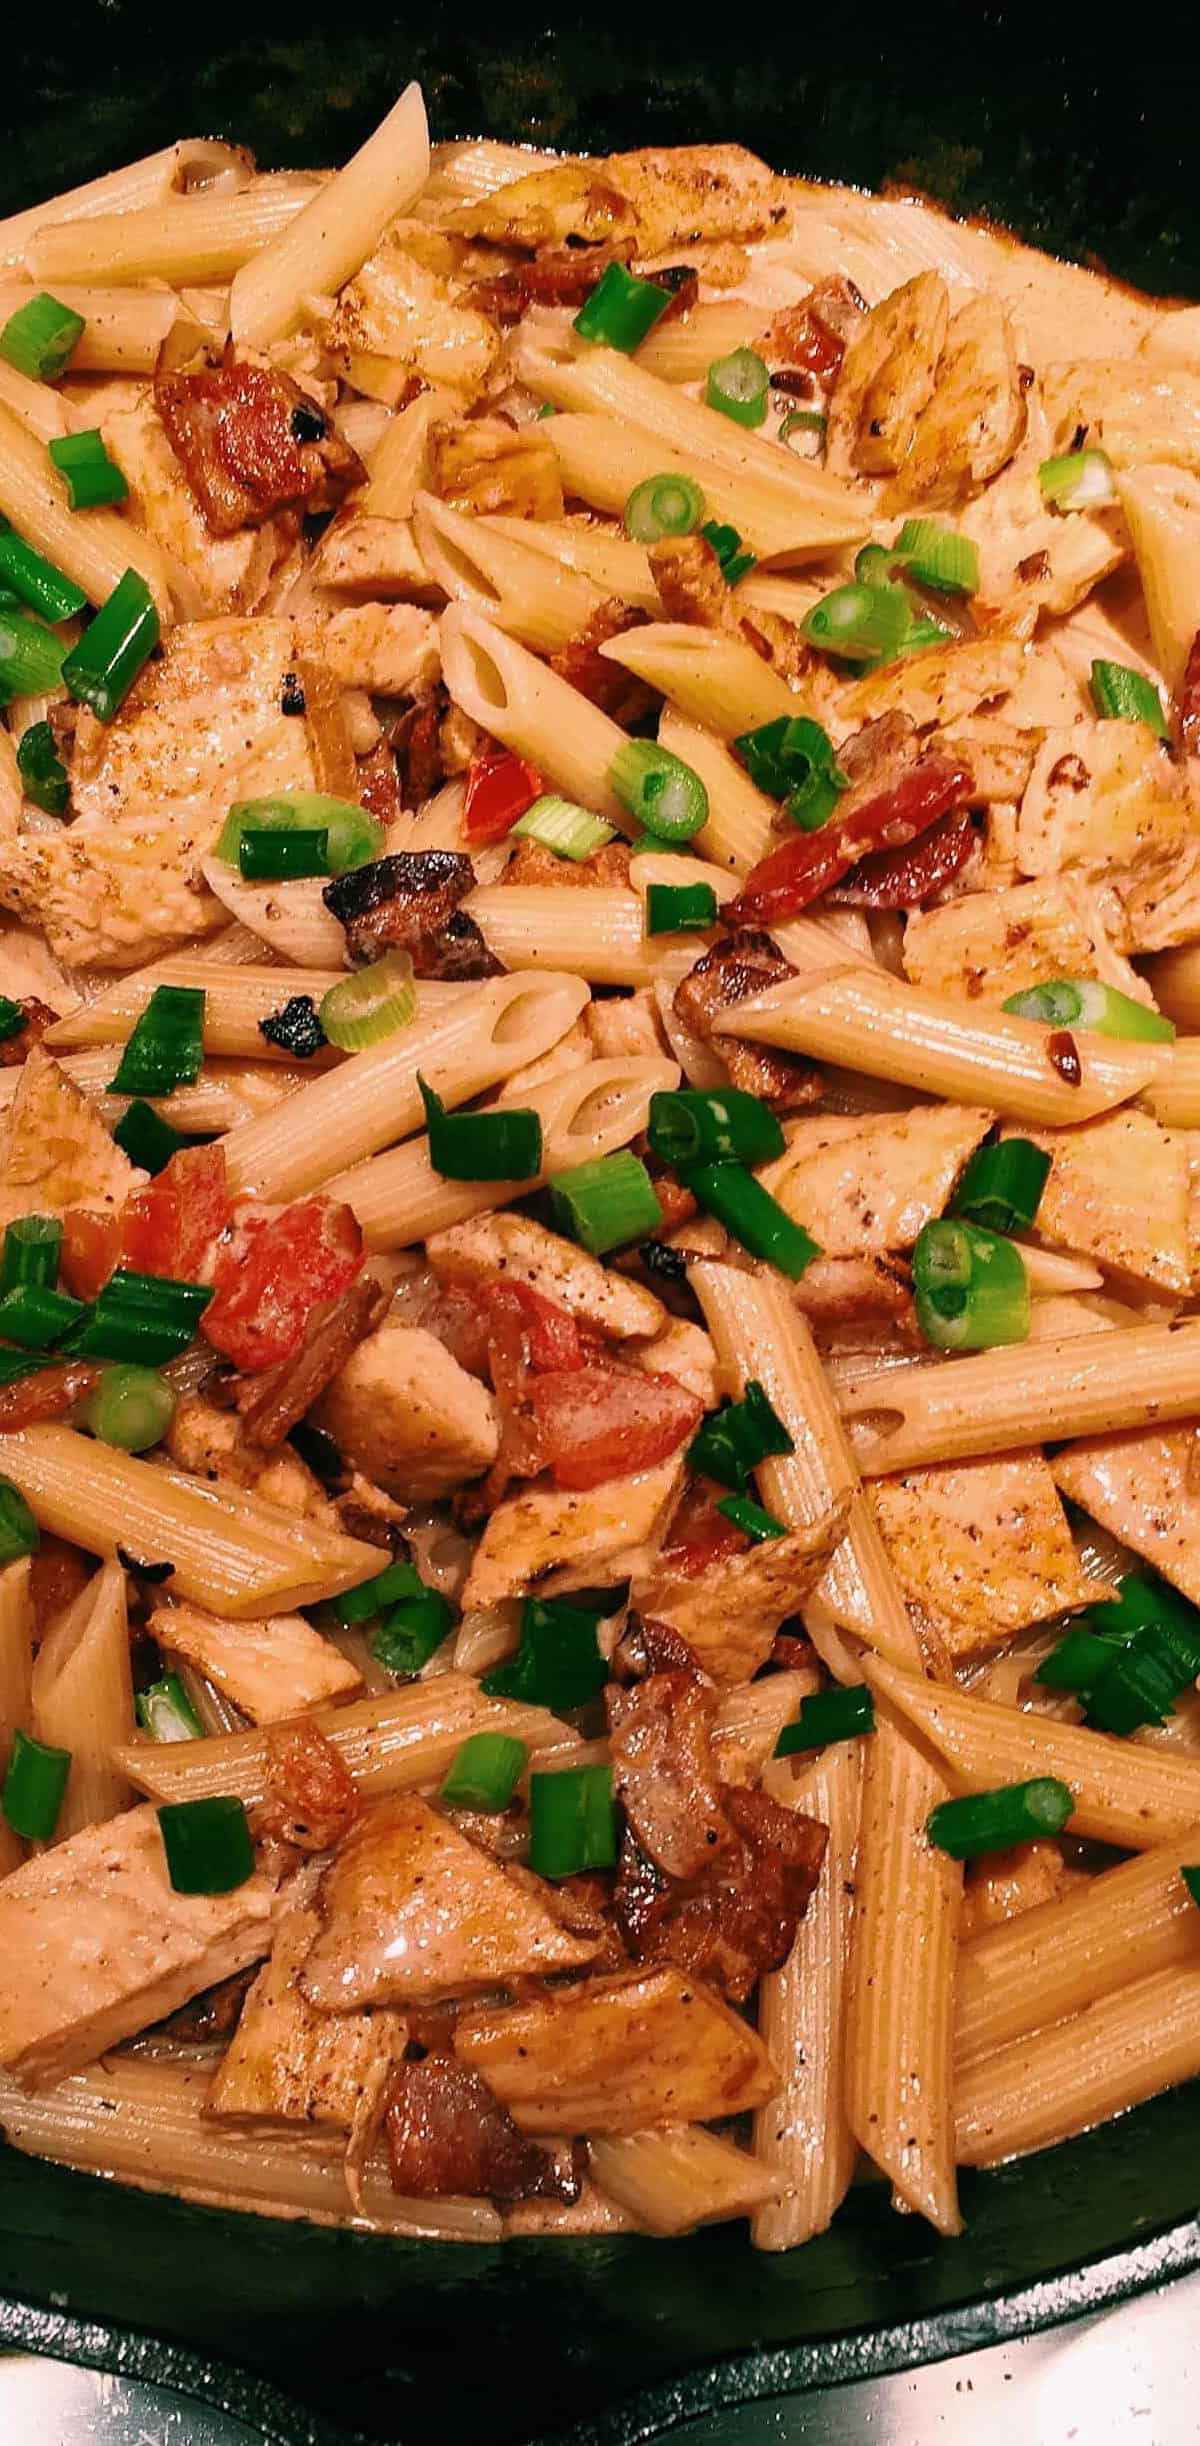  Exciting news: This Firebirds Chicken Pasta recipe tastes just like the restaurant’s version!